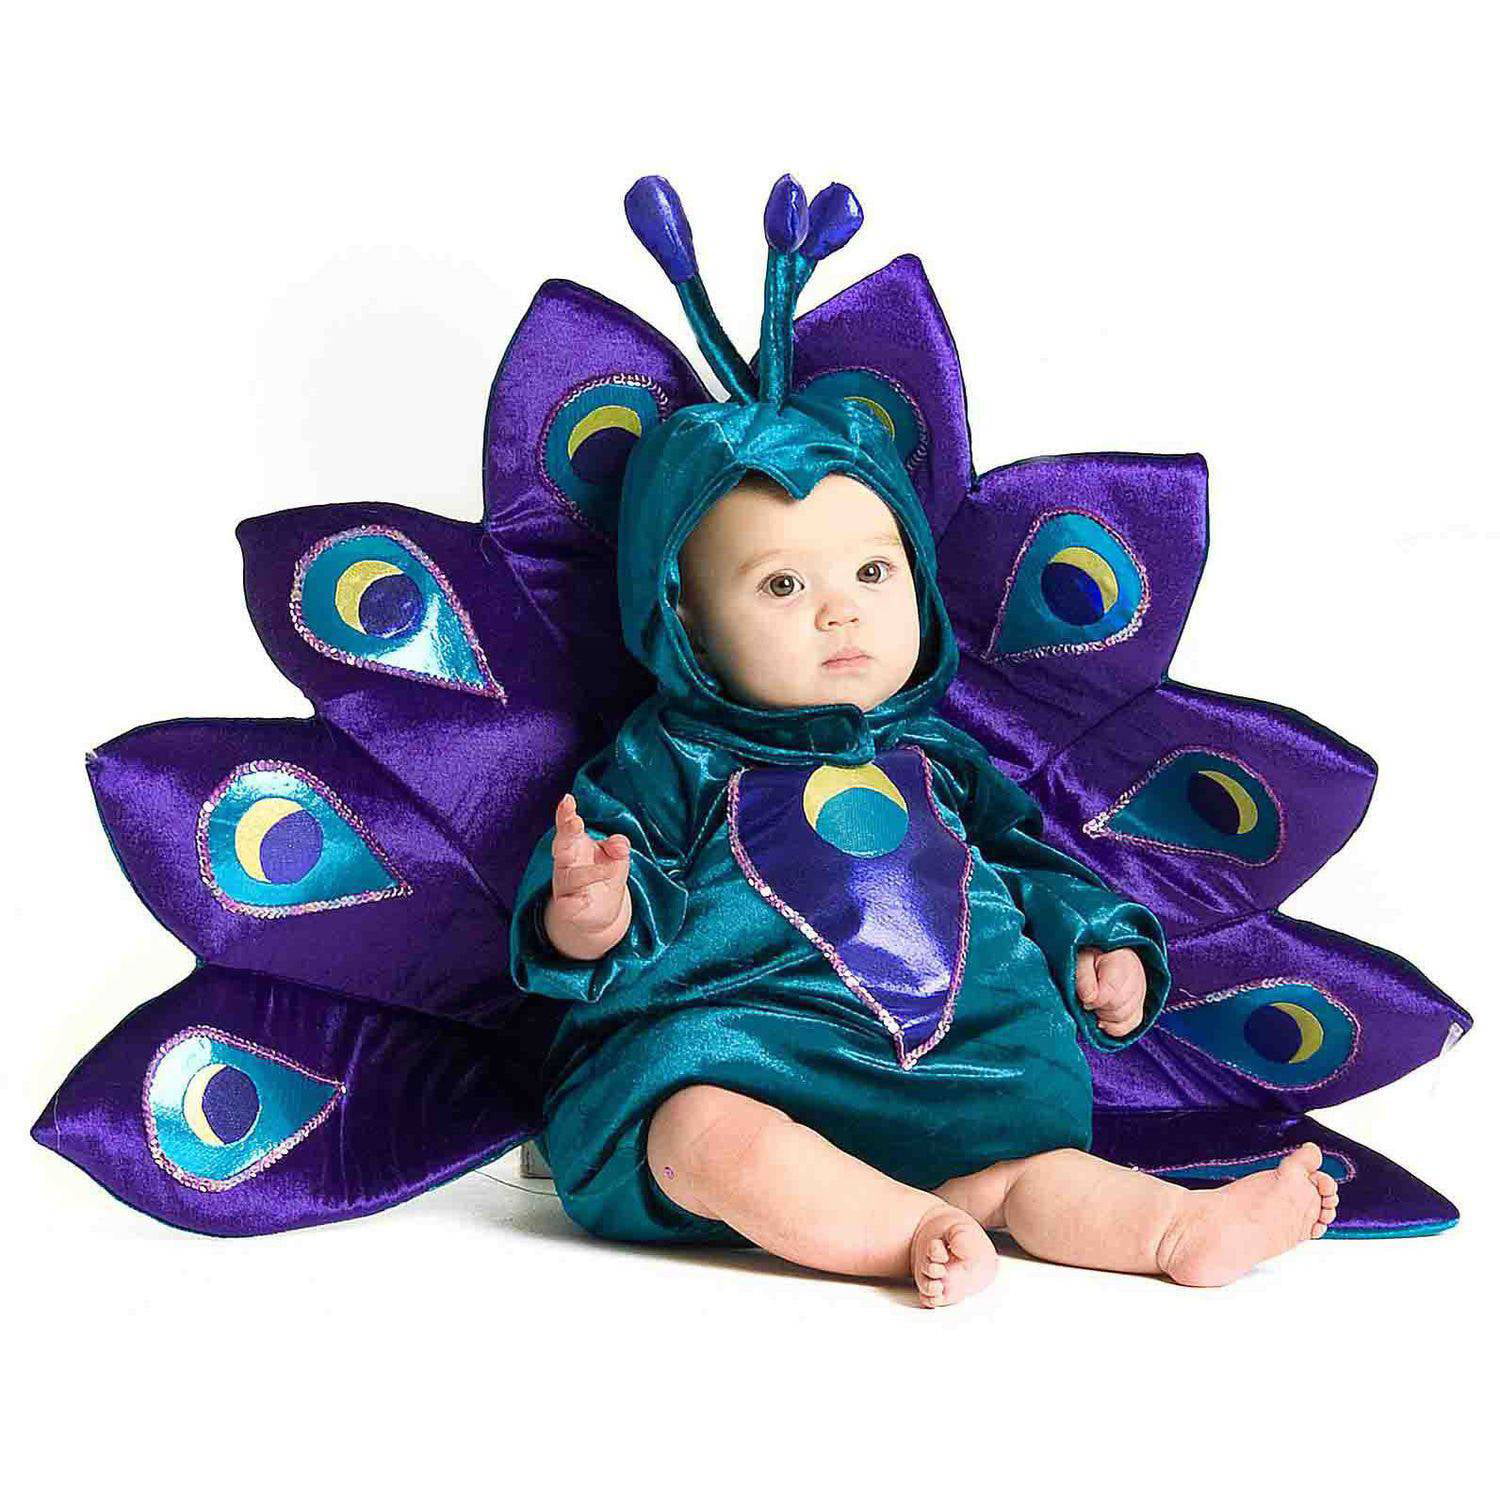 peacock dress for baby